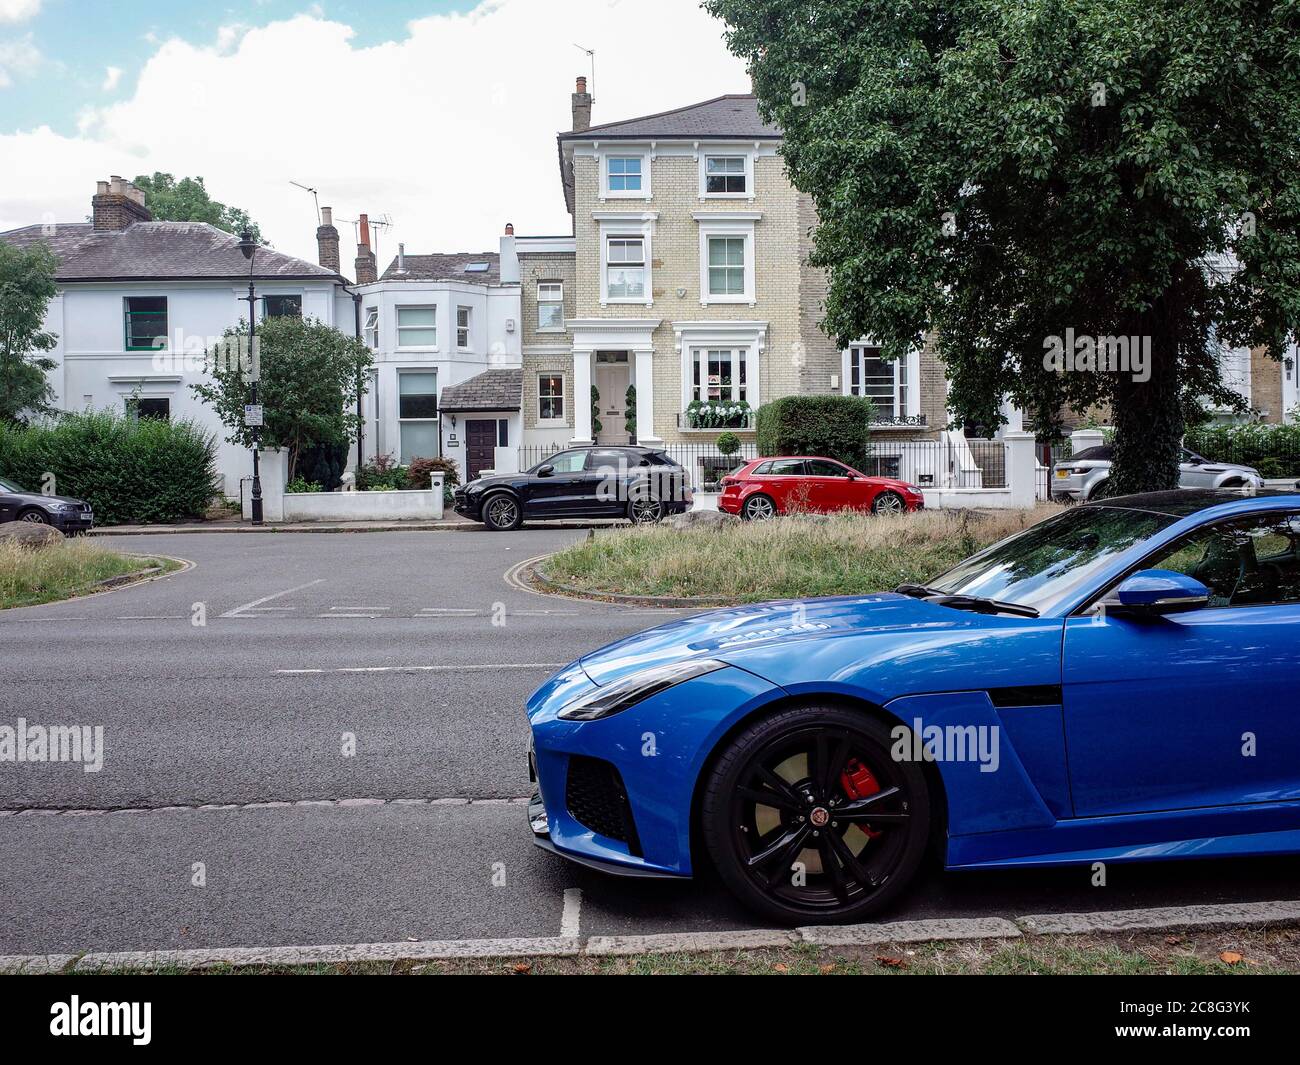 Attractive and upmarket residential street in Ealing, West London with large houses and an expensive car Stock Photo